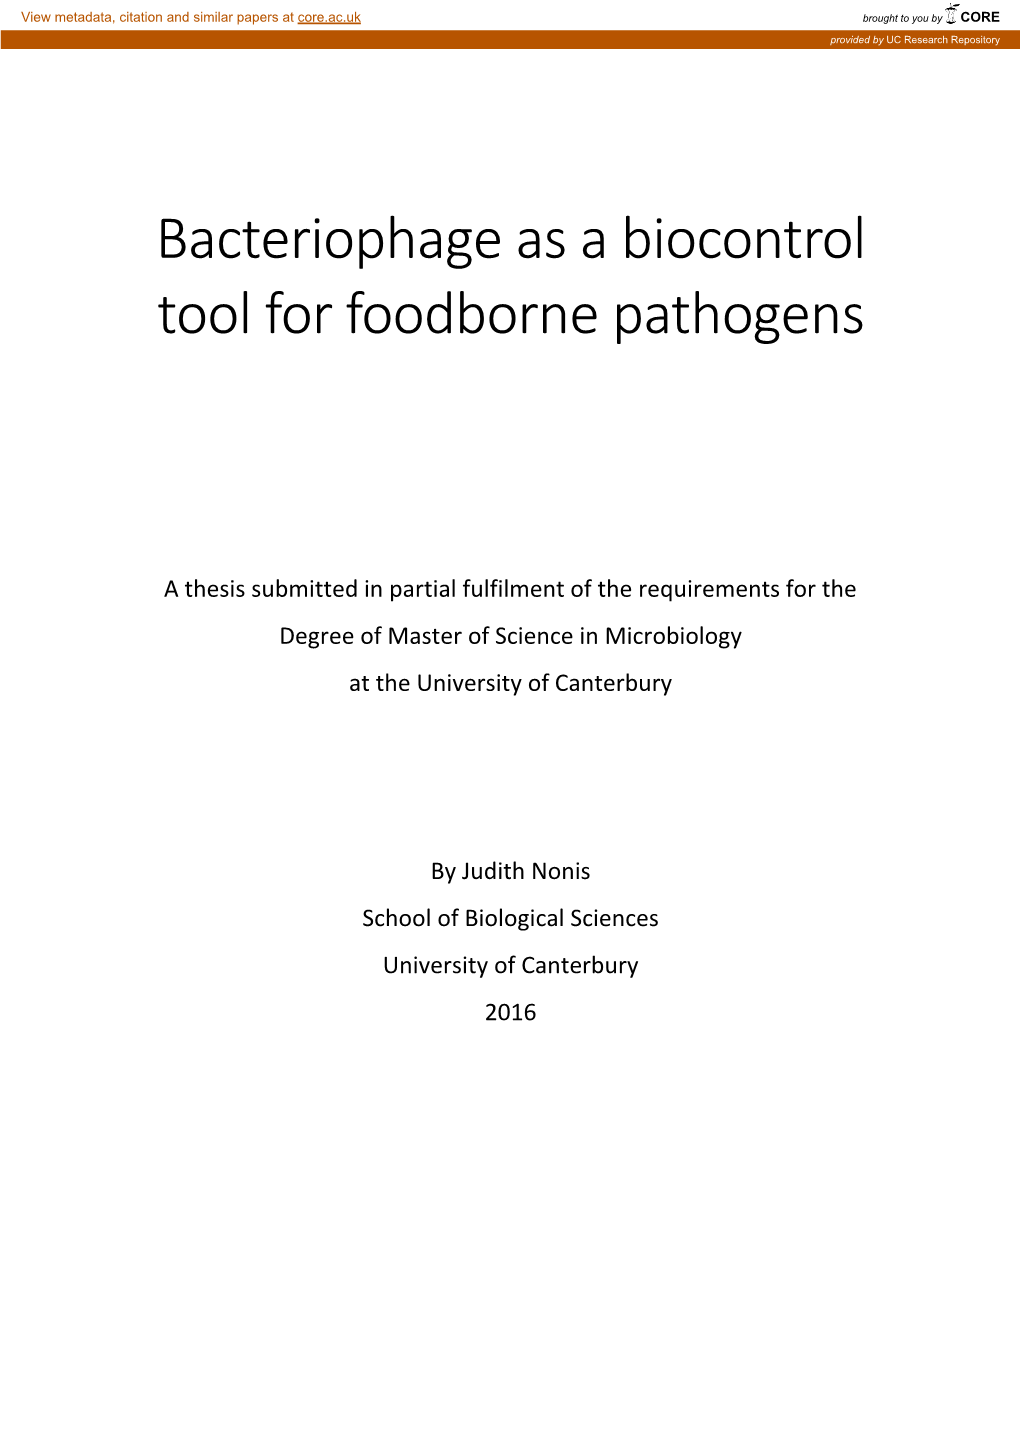 Bacteriophage As a Biocontrol Tool for Foodborne Pathogens